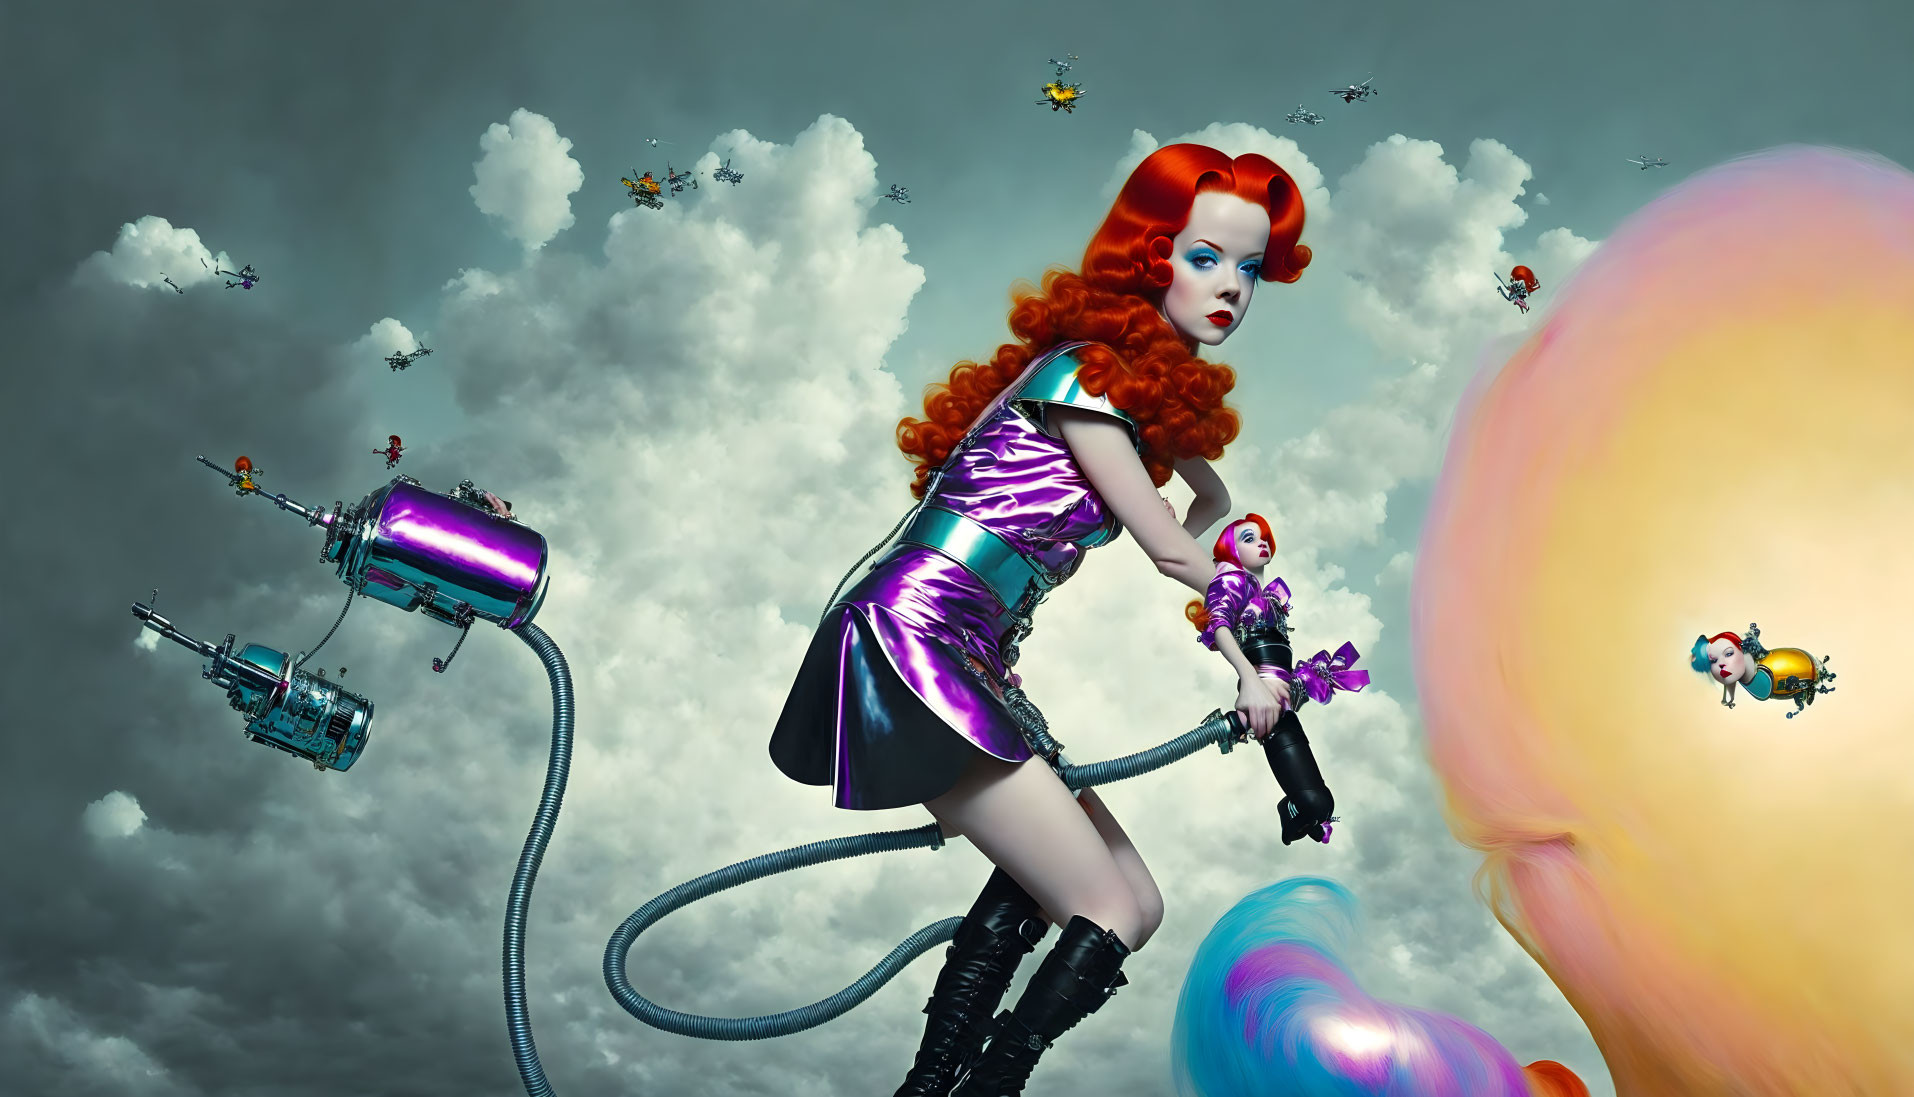 Whimsical digital art: Red-haired female with hose and flying machines